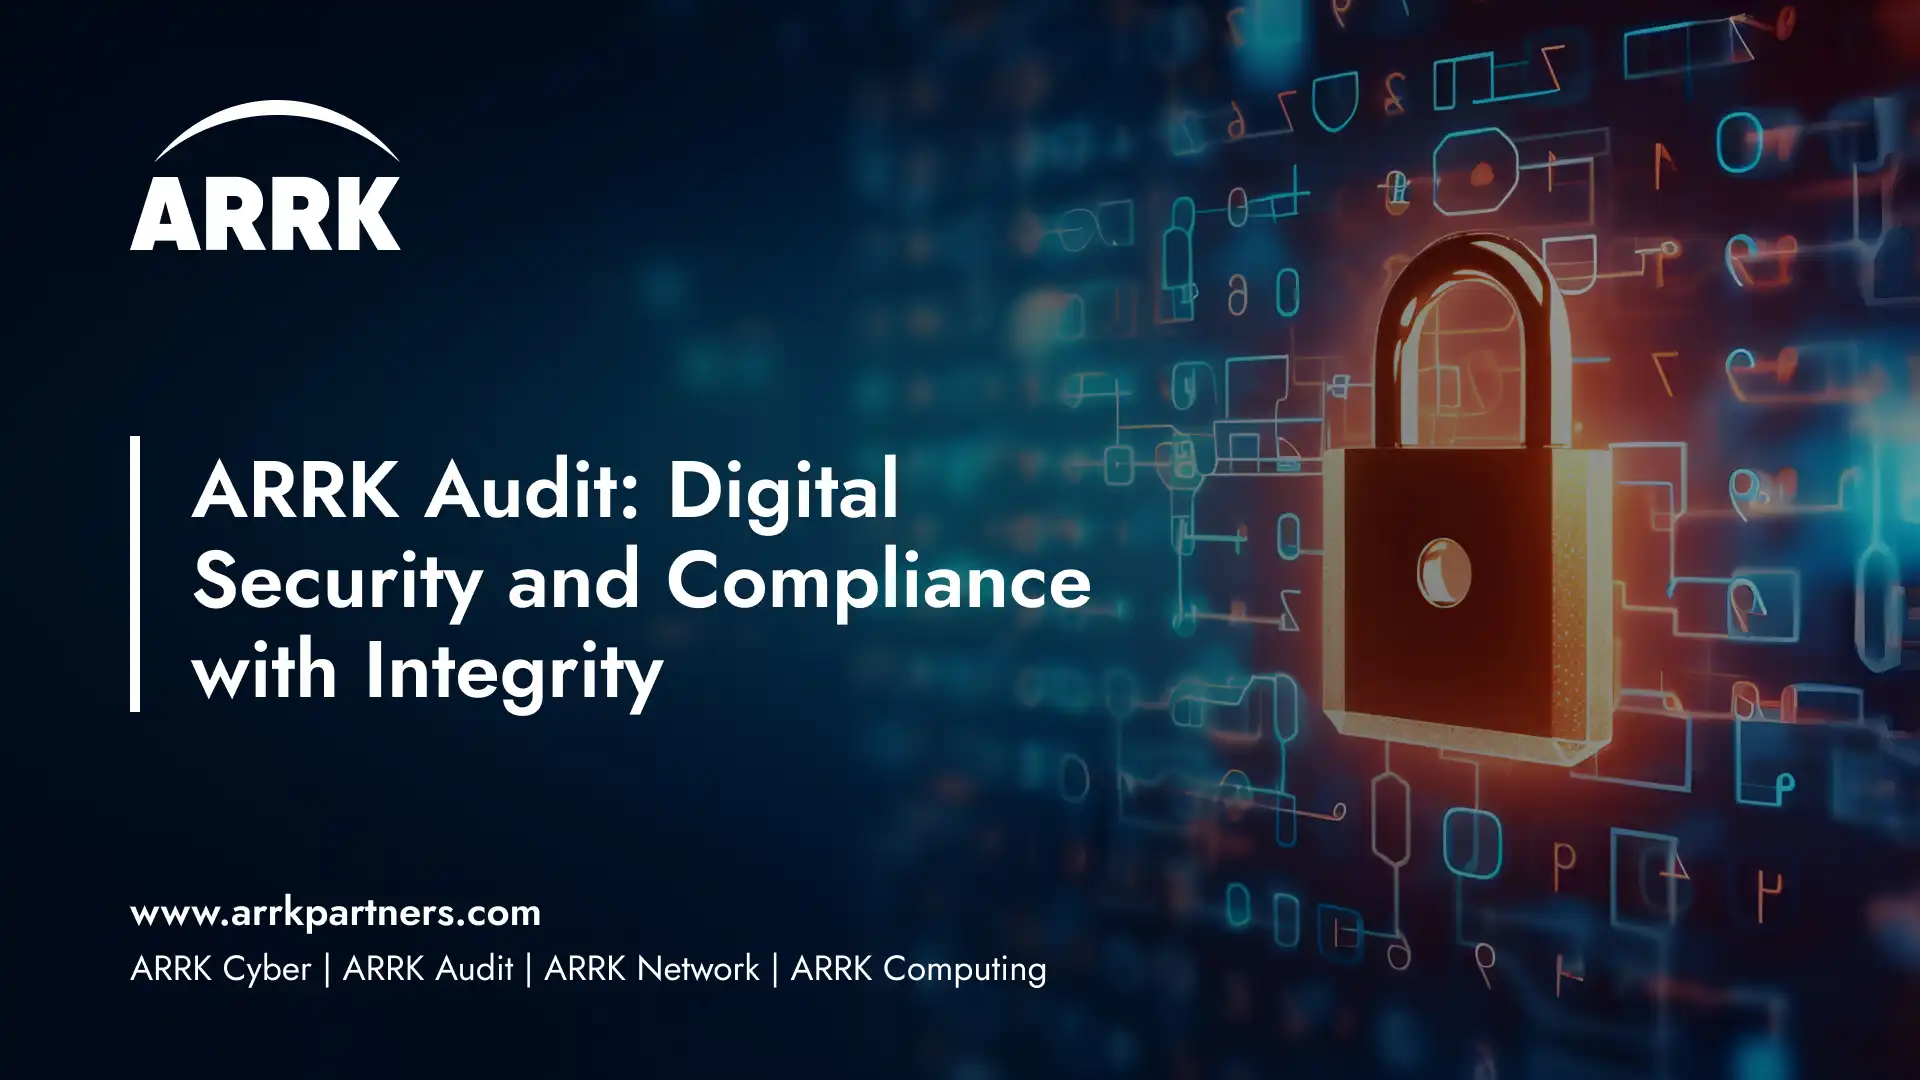 ARRK Audit - Digital Security and Compliance with Integrity